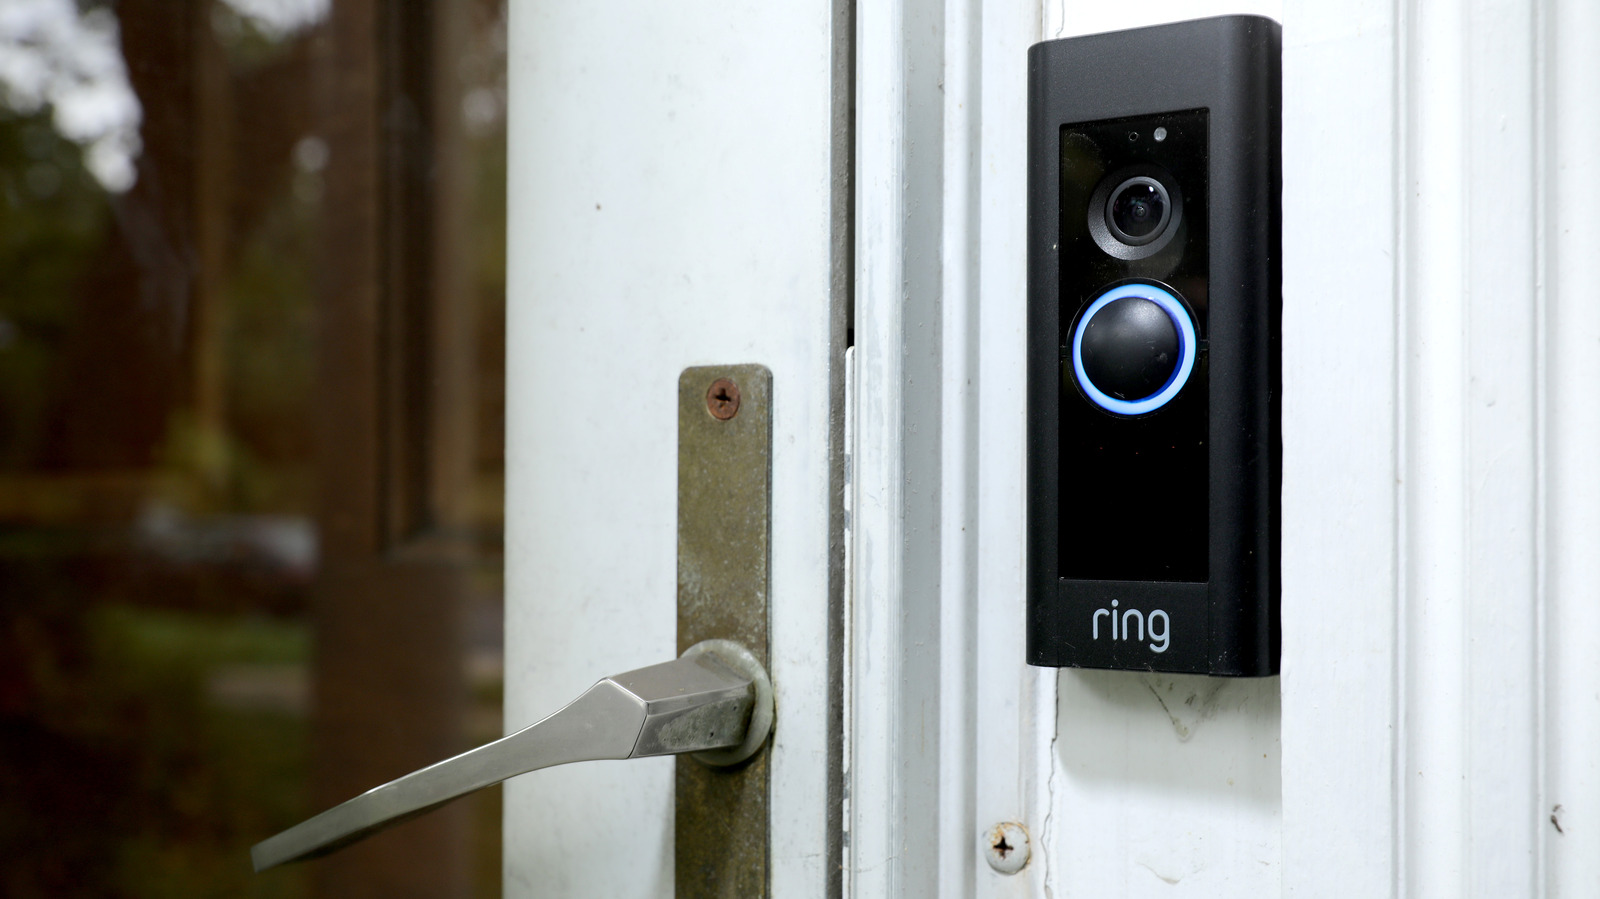 What Happens To Your Ring Doorbell When The Power Goes Out?